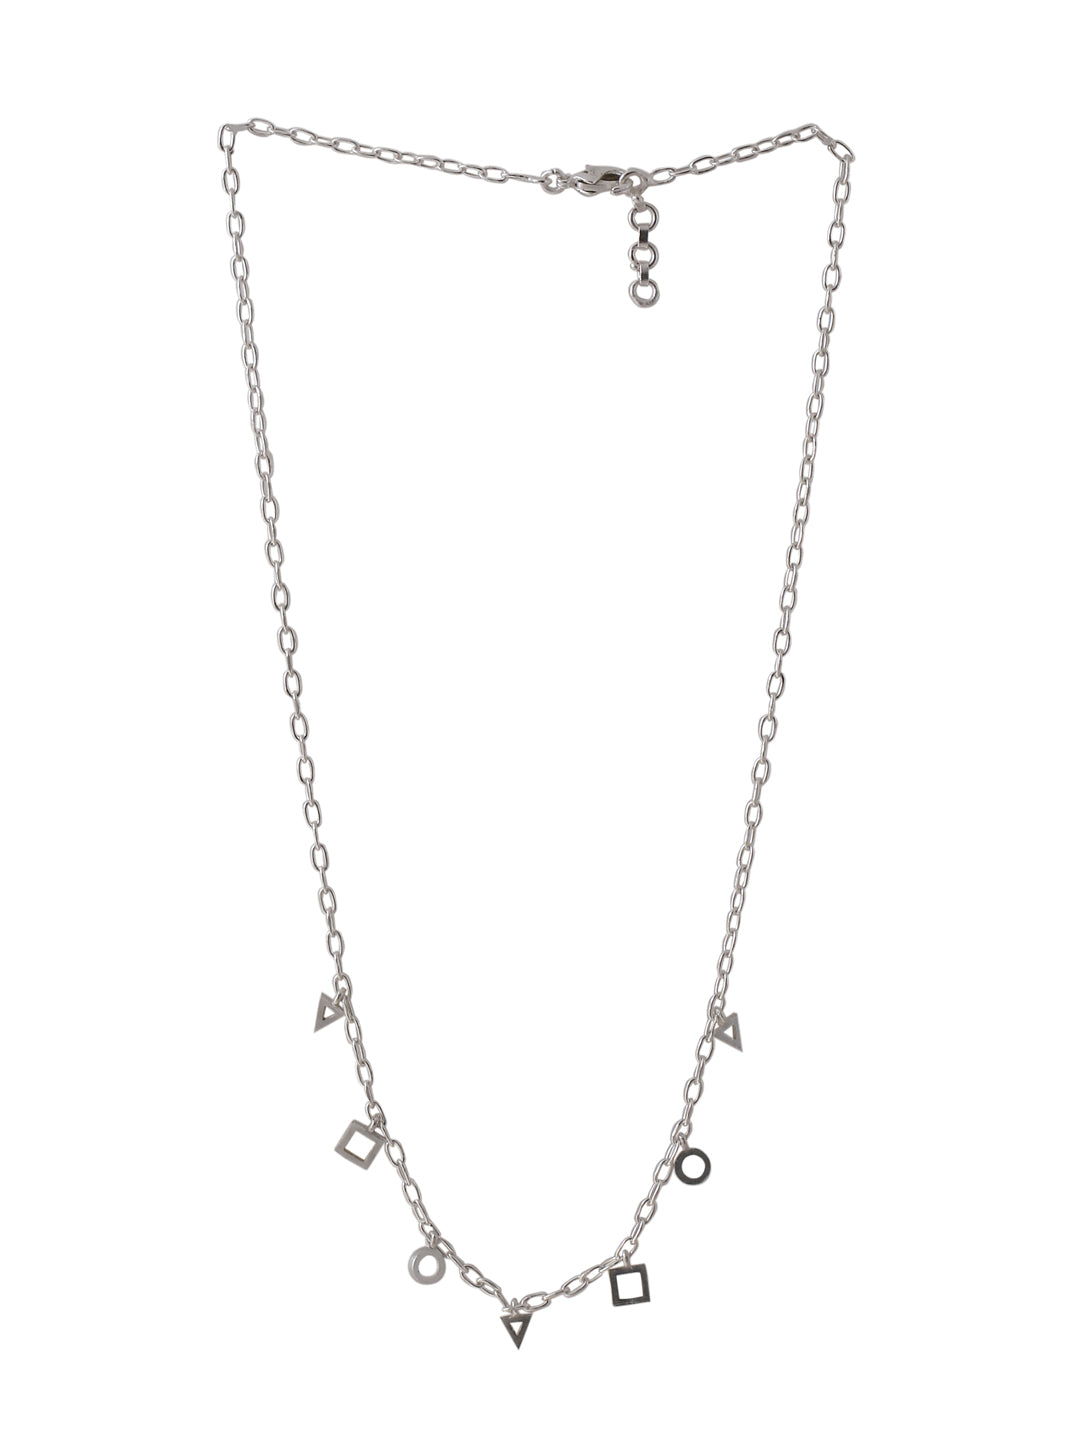 River Necklace - Silver